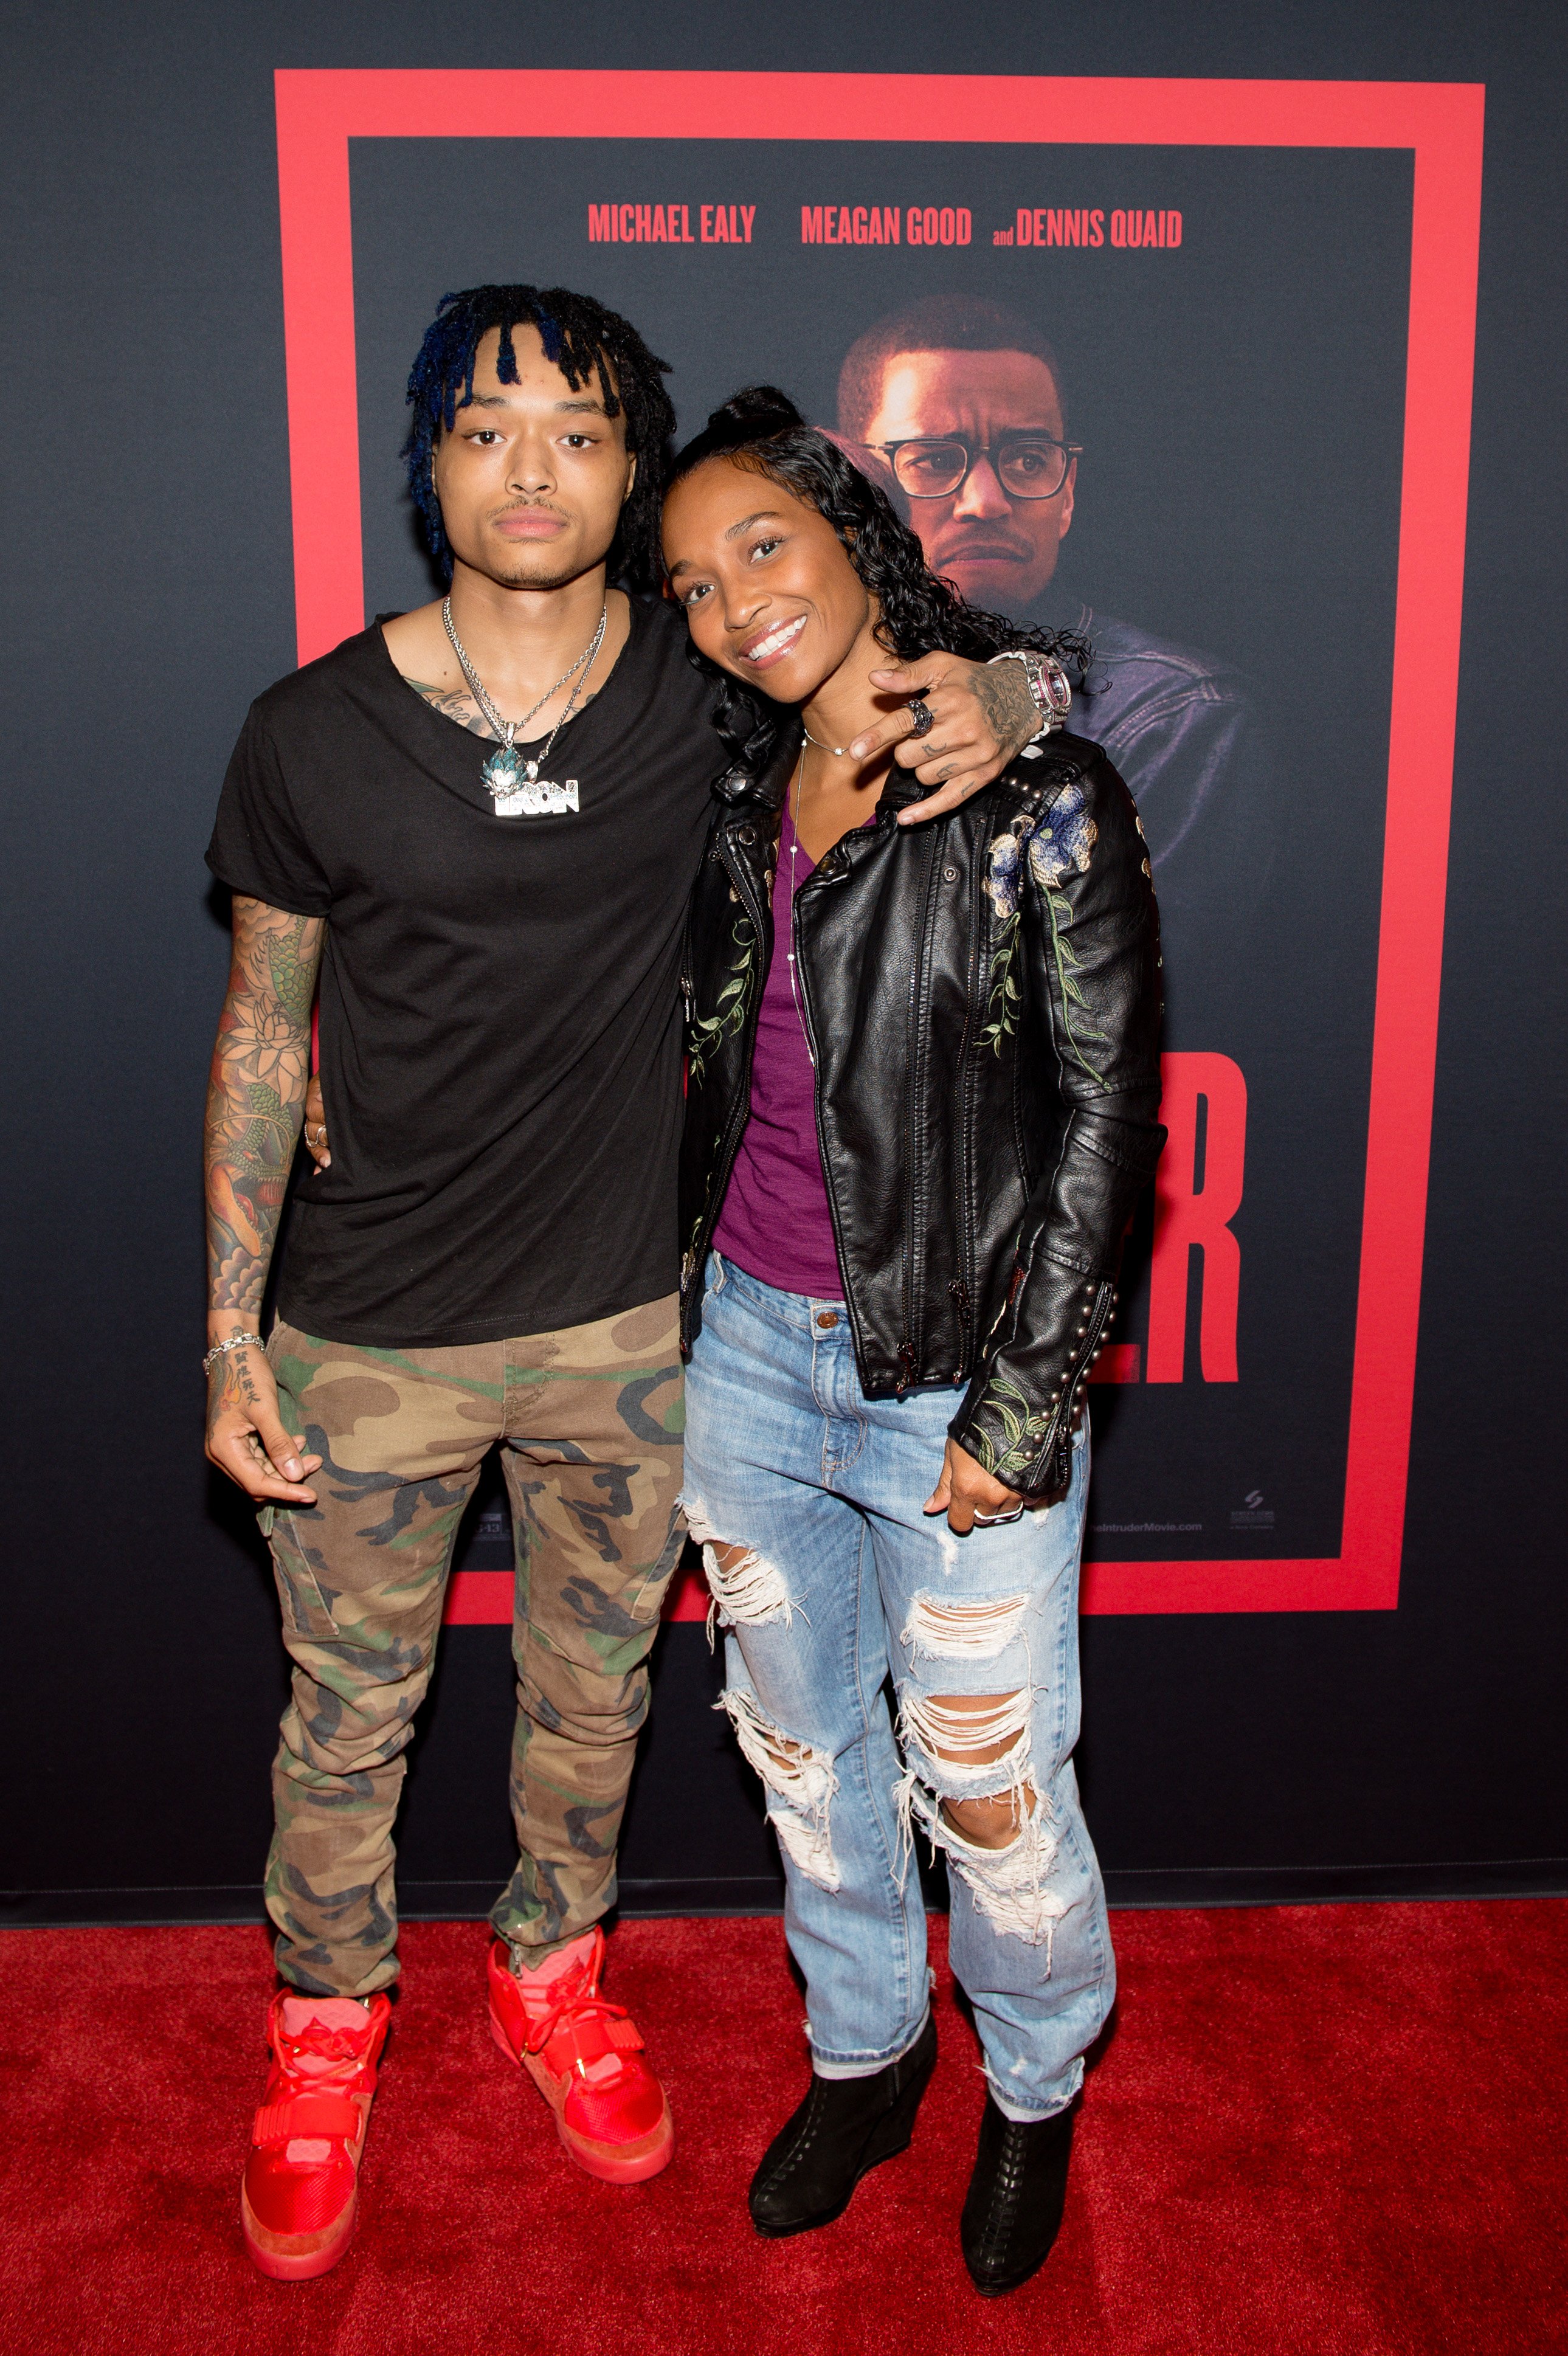 Rozonda 'Chilli' Thomas and her son ron Austin attend "The Intruder" red carpet screening on April 22, 2019 in Atlanta, Georgia.| Source: Getty Images